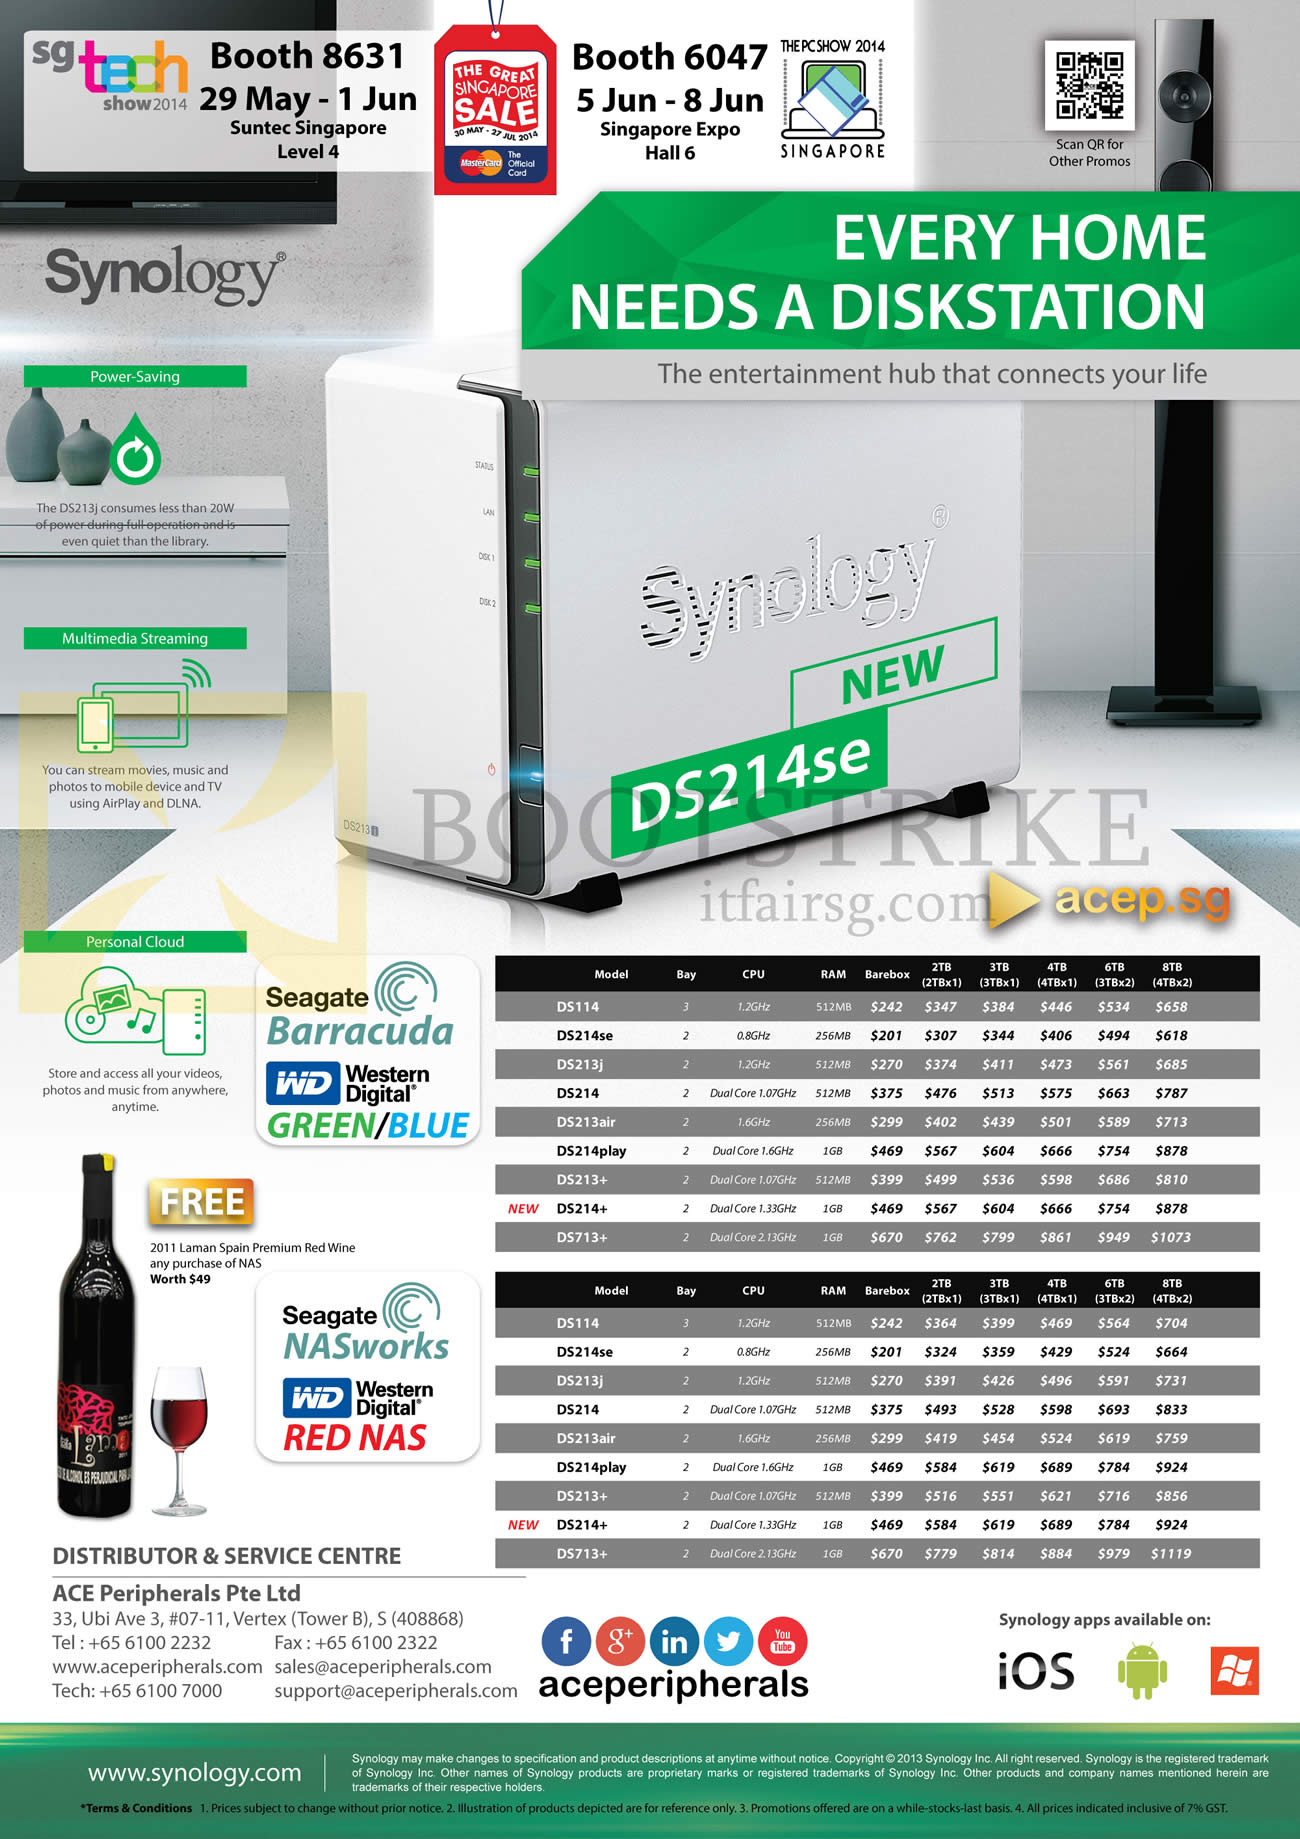 PC SHOW 2014 price list image brochure of ACE Peripherals Synology NAS DiskStations DS214se, DS213J, DS213air, DS214, DS214play, DS214plus, DS713 Plus